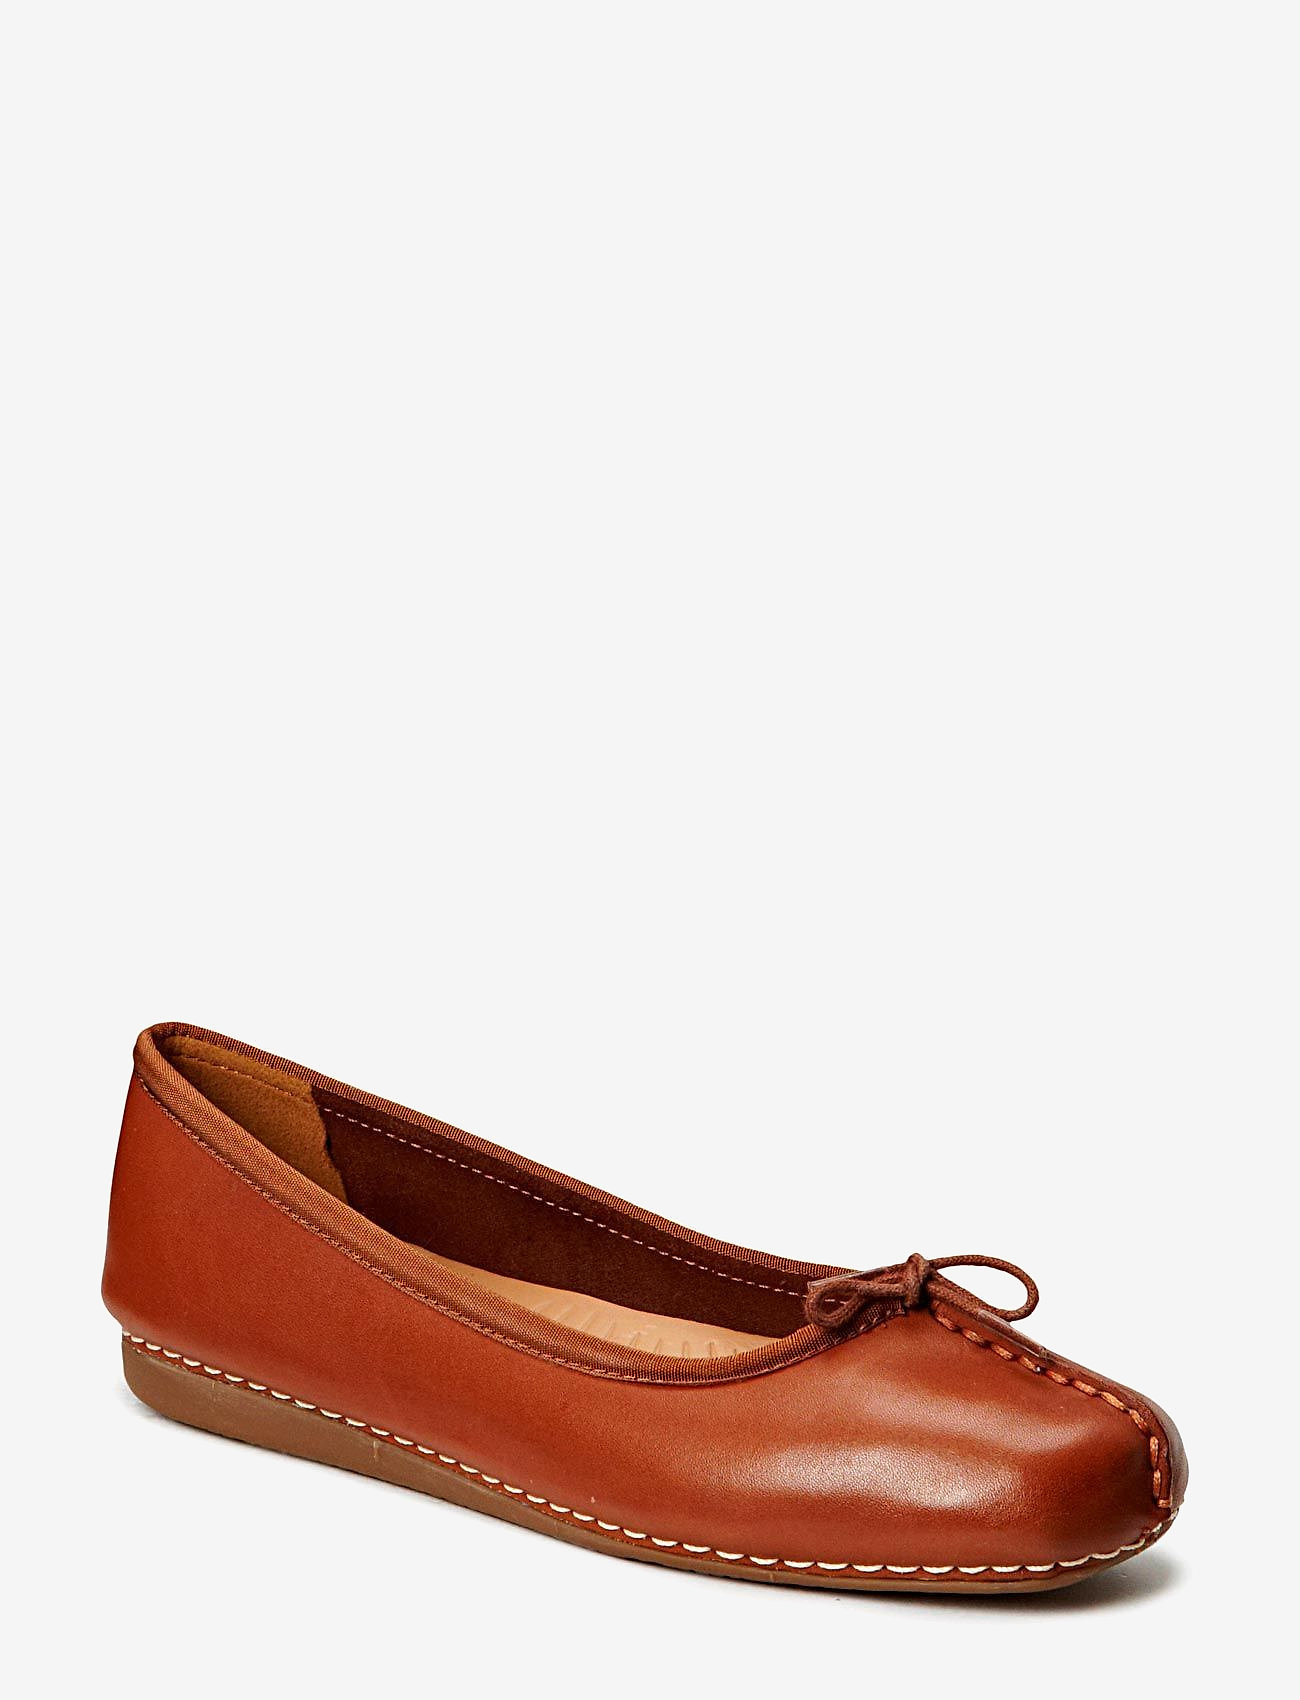 clarks freckle ice sale